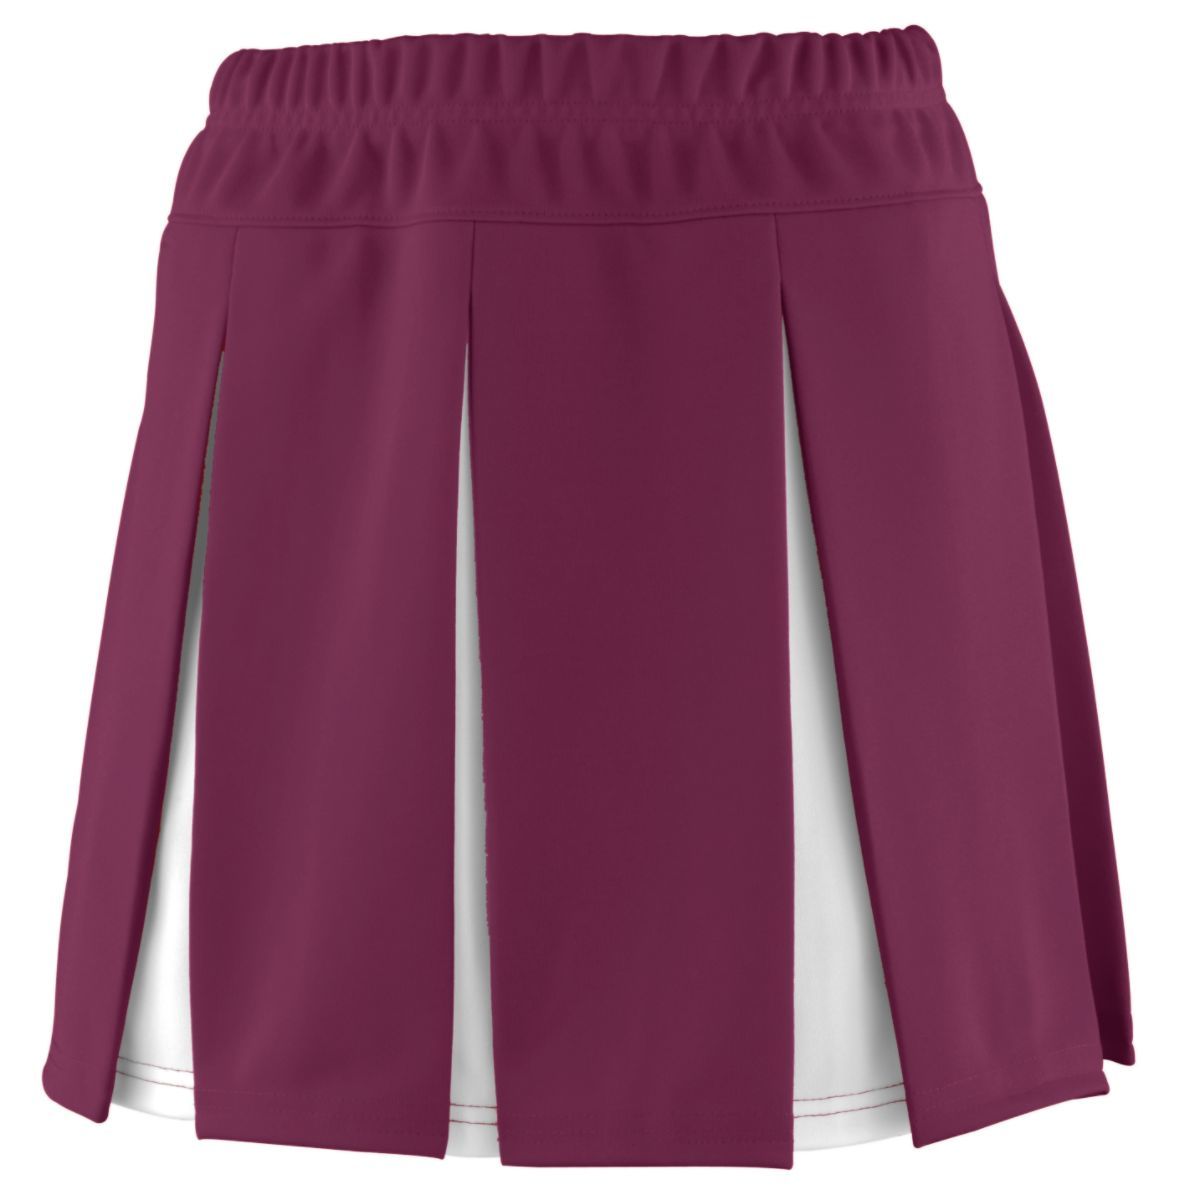 Augusta Sportswear Ladies Liberty Skirt in Maroon/White  -Part of the Ladies, Augusta-Products, Cheer product lines at KanaleyCreations.com